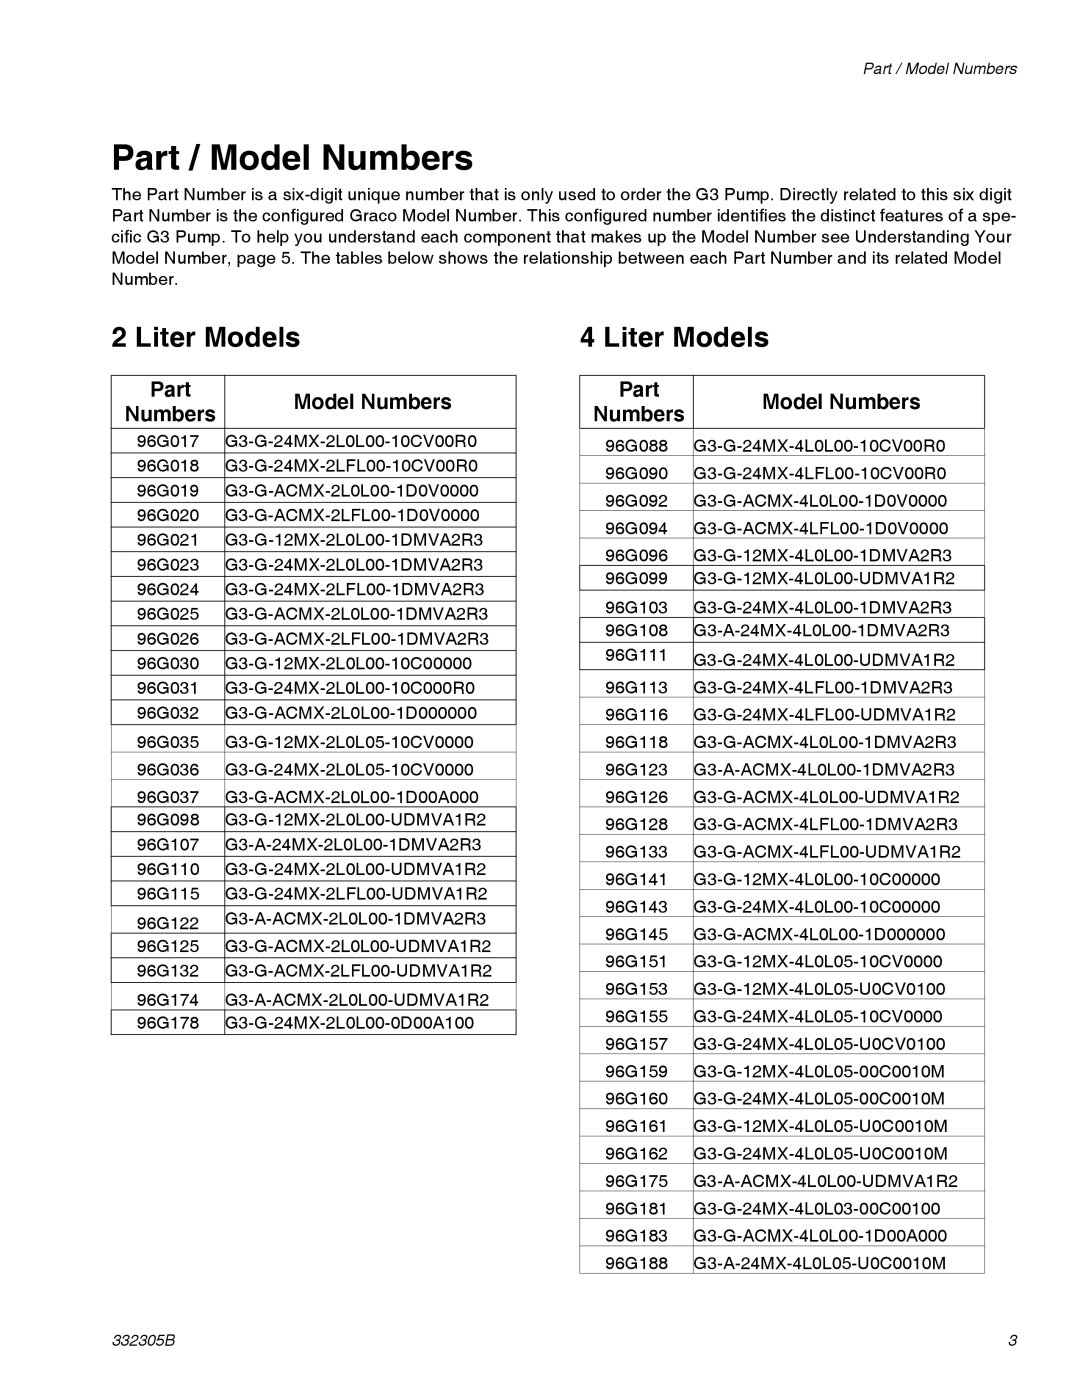 Graco 332305B important safety instructions Part / Model Numbers, Liter Models 